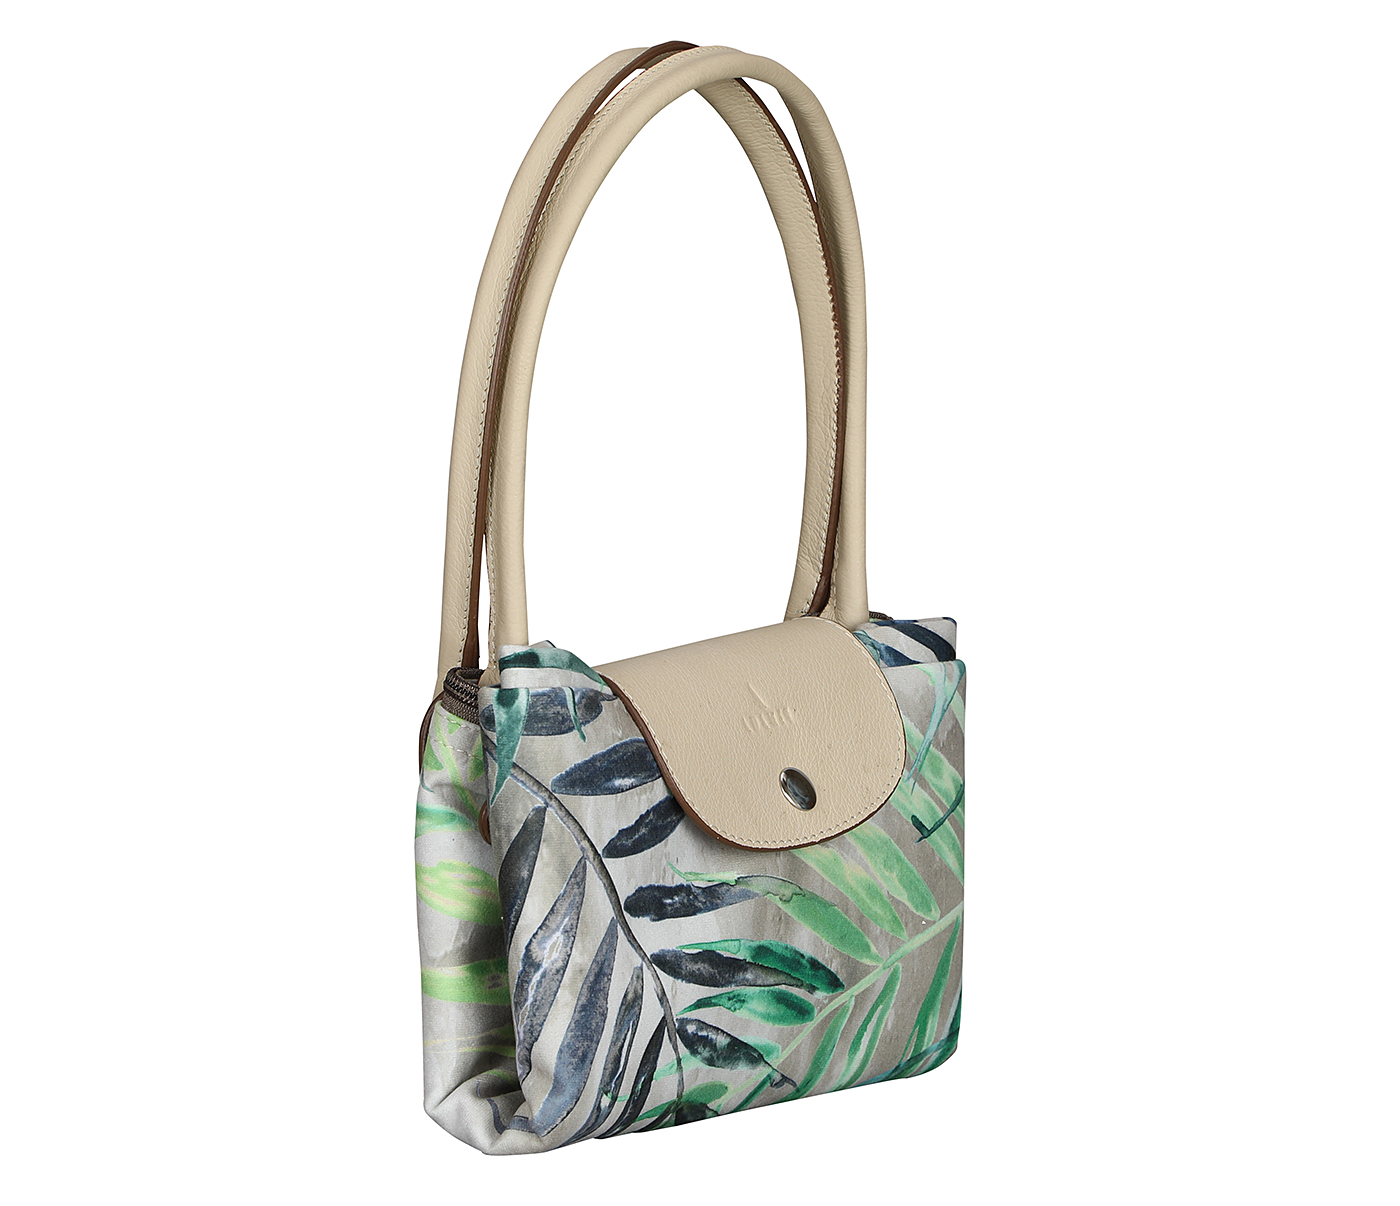 B882--Adelina Folding Tote Bag In Leaf Print Material With Genuine Leather Handles And Flap - Green